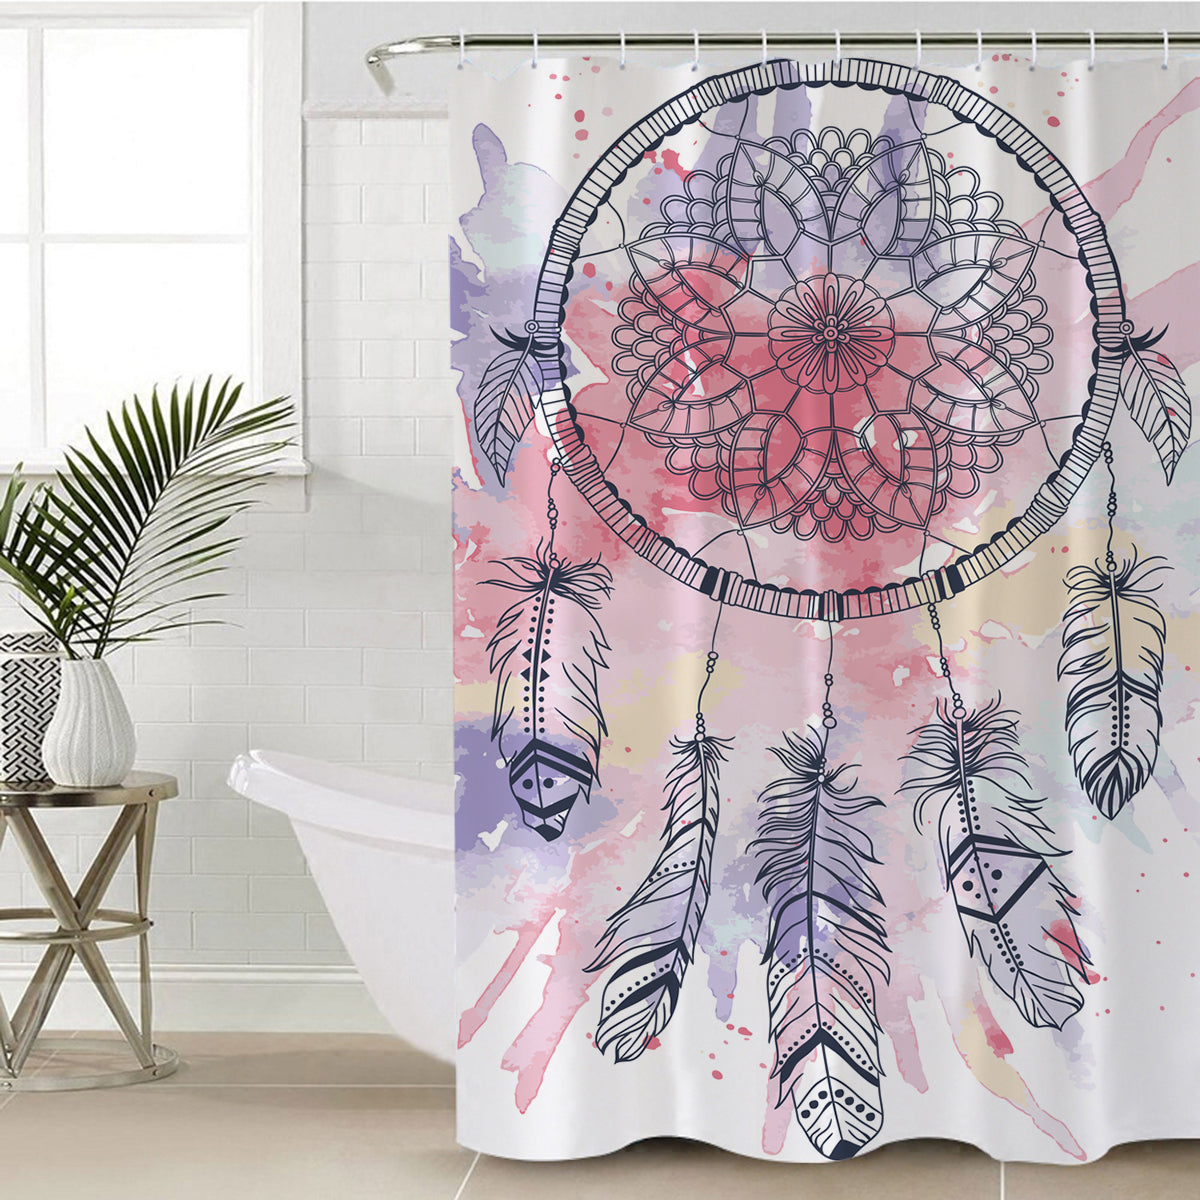 Powwow Store gb nat00379 pink water color dream catcher shower curtain